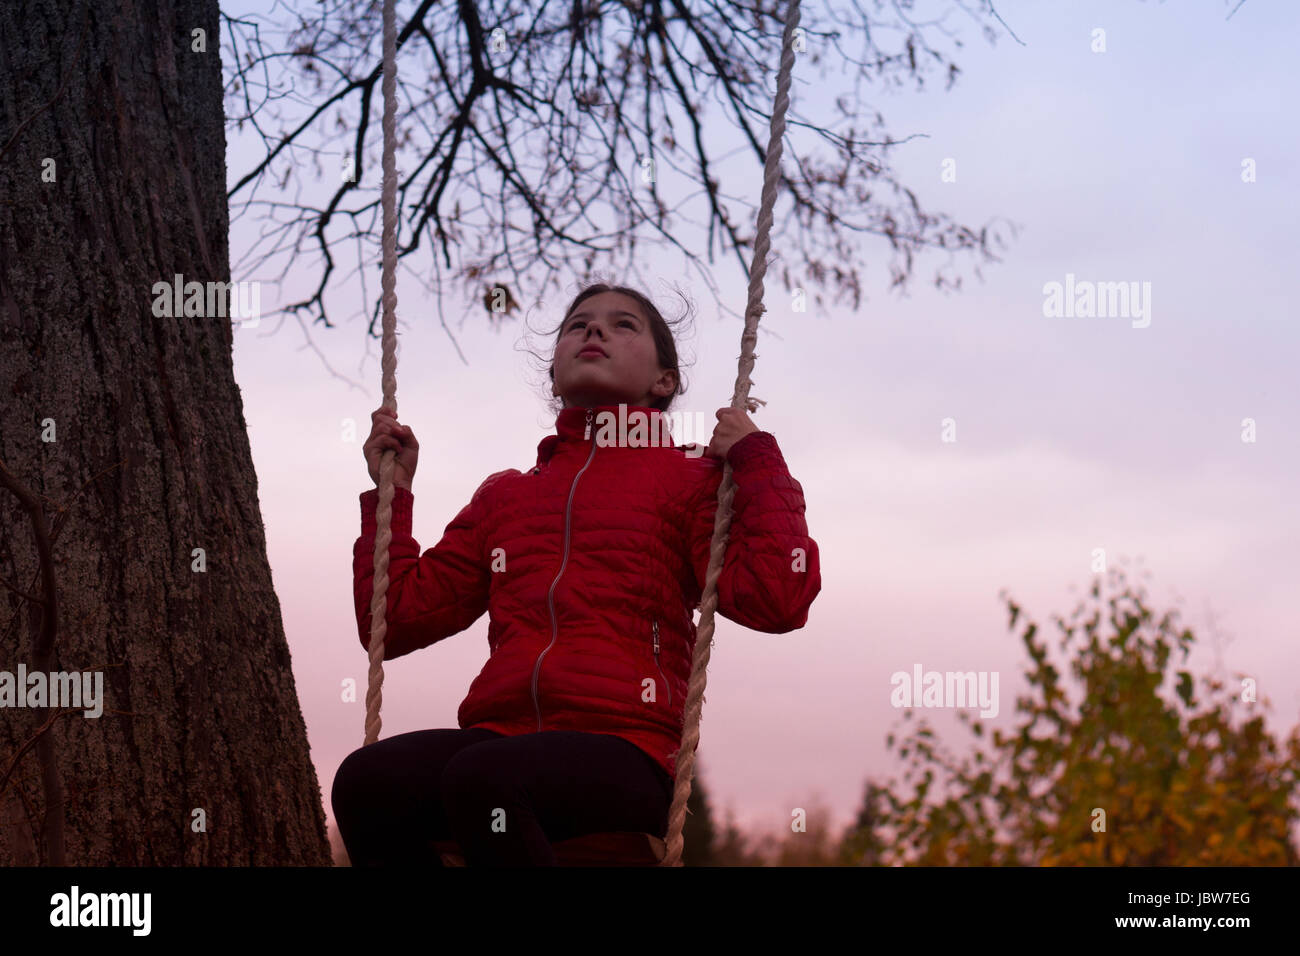 Girl on swing in park, Chusovoy, Russia Stock Photo